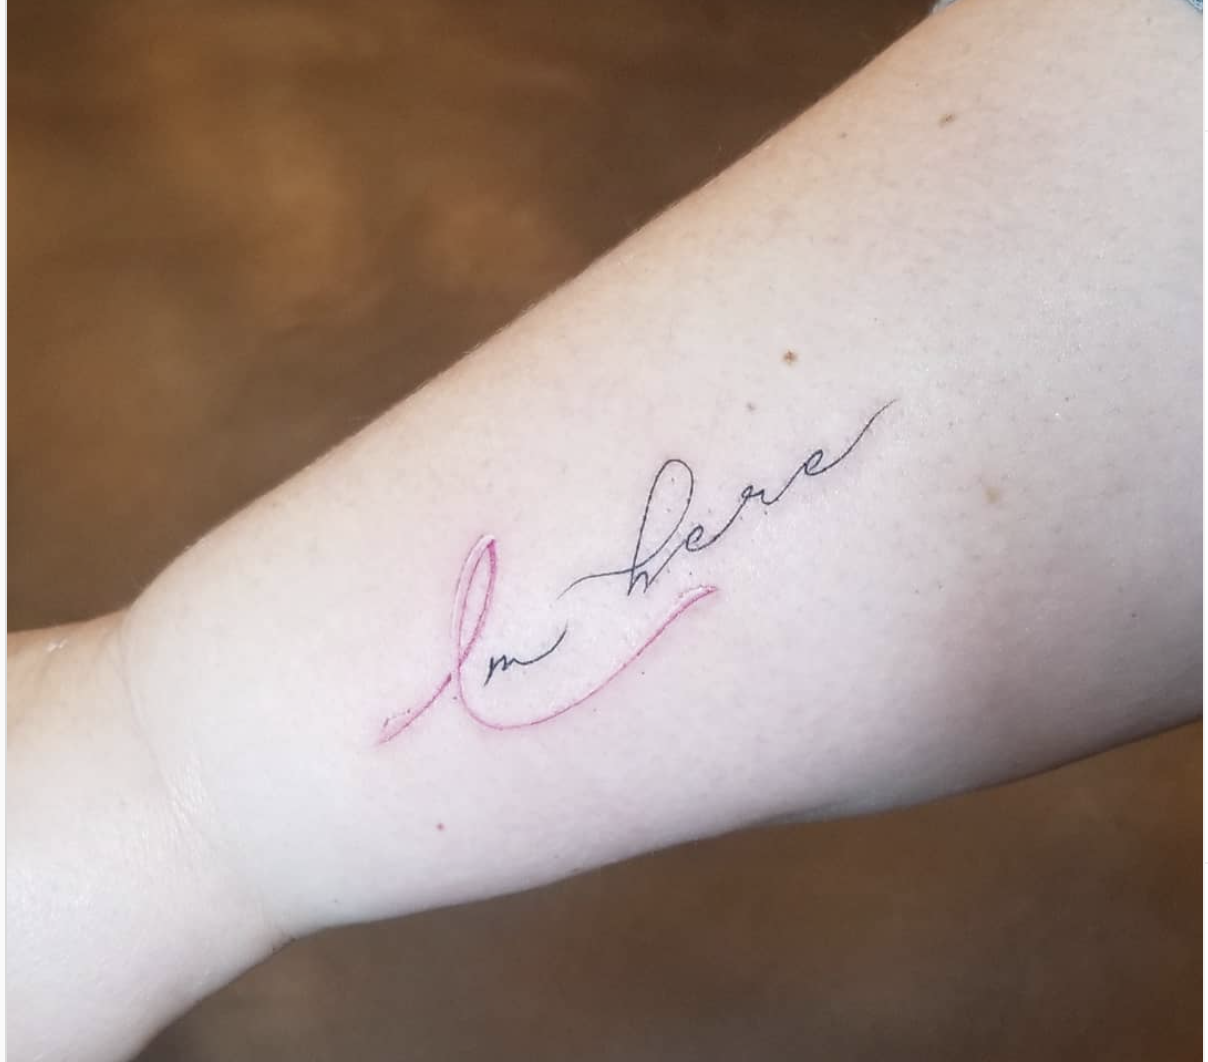 "I'm here" breast cancer tattoo with pink script